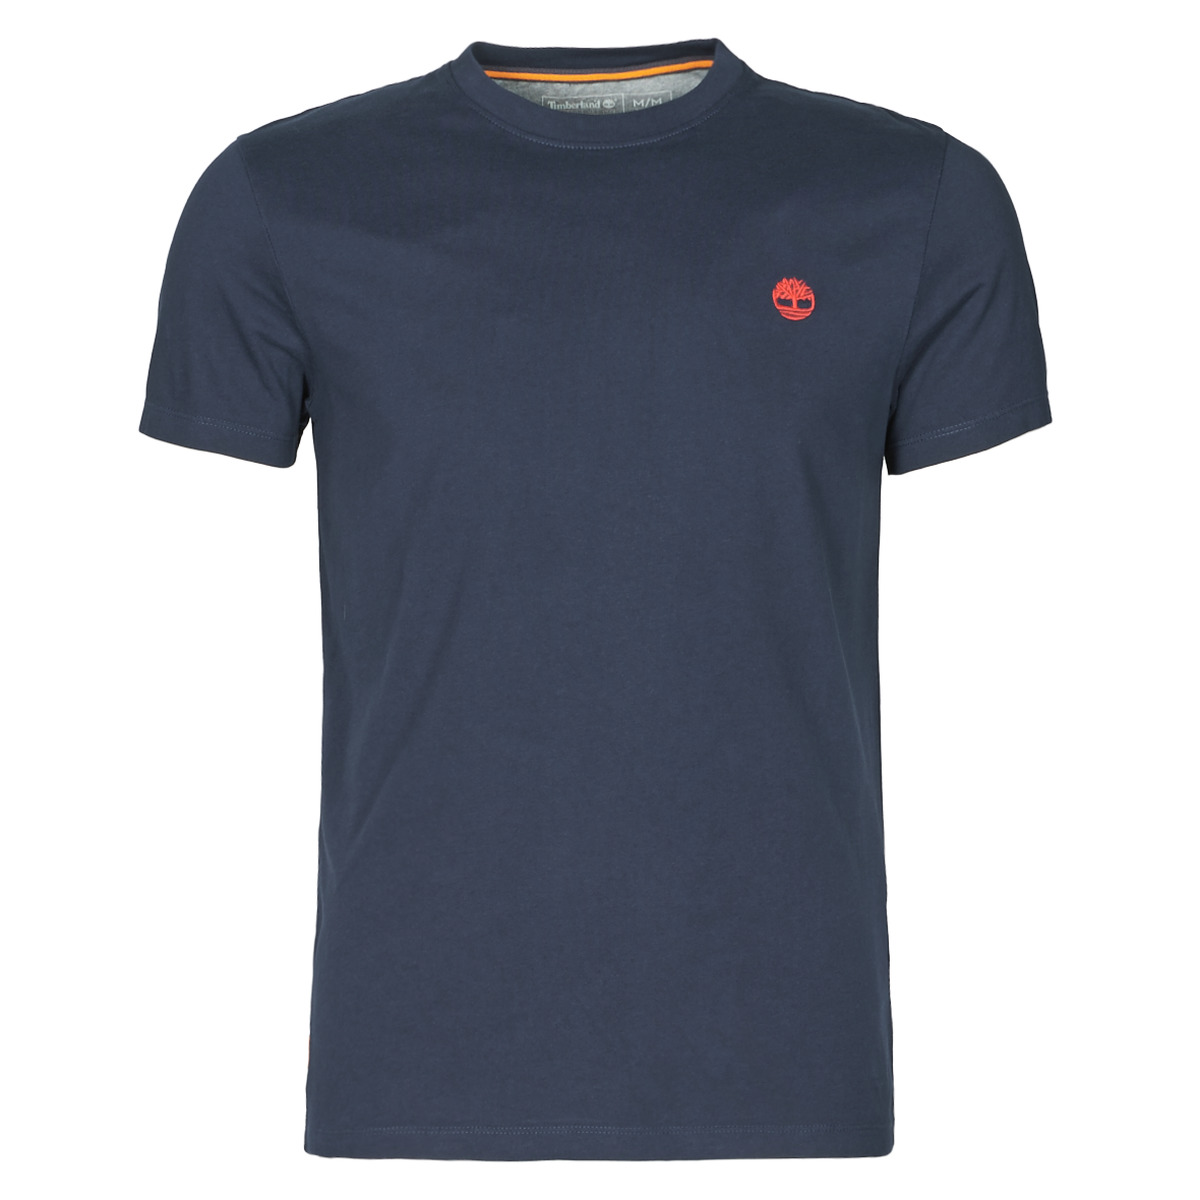 RIVER Europe ! SS | Spartoo TEE Clothing DUNSTAN SLIM delivery t-shirts Timberland 33,00 Marine Fast POCKET Men - short-sleeved € -